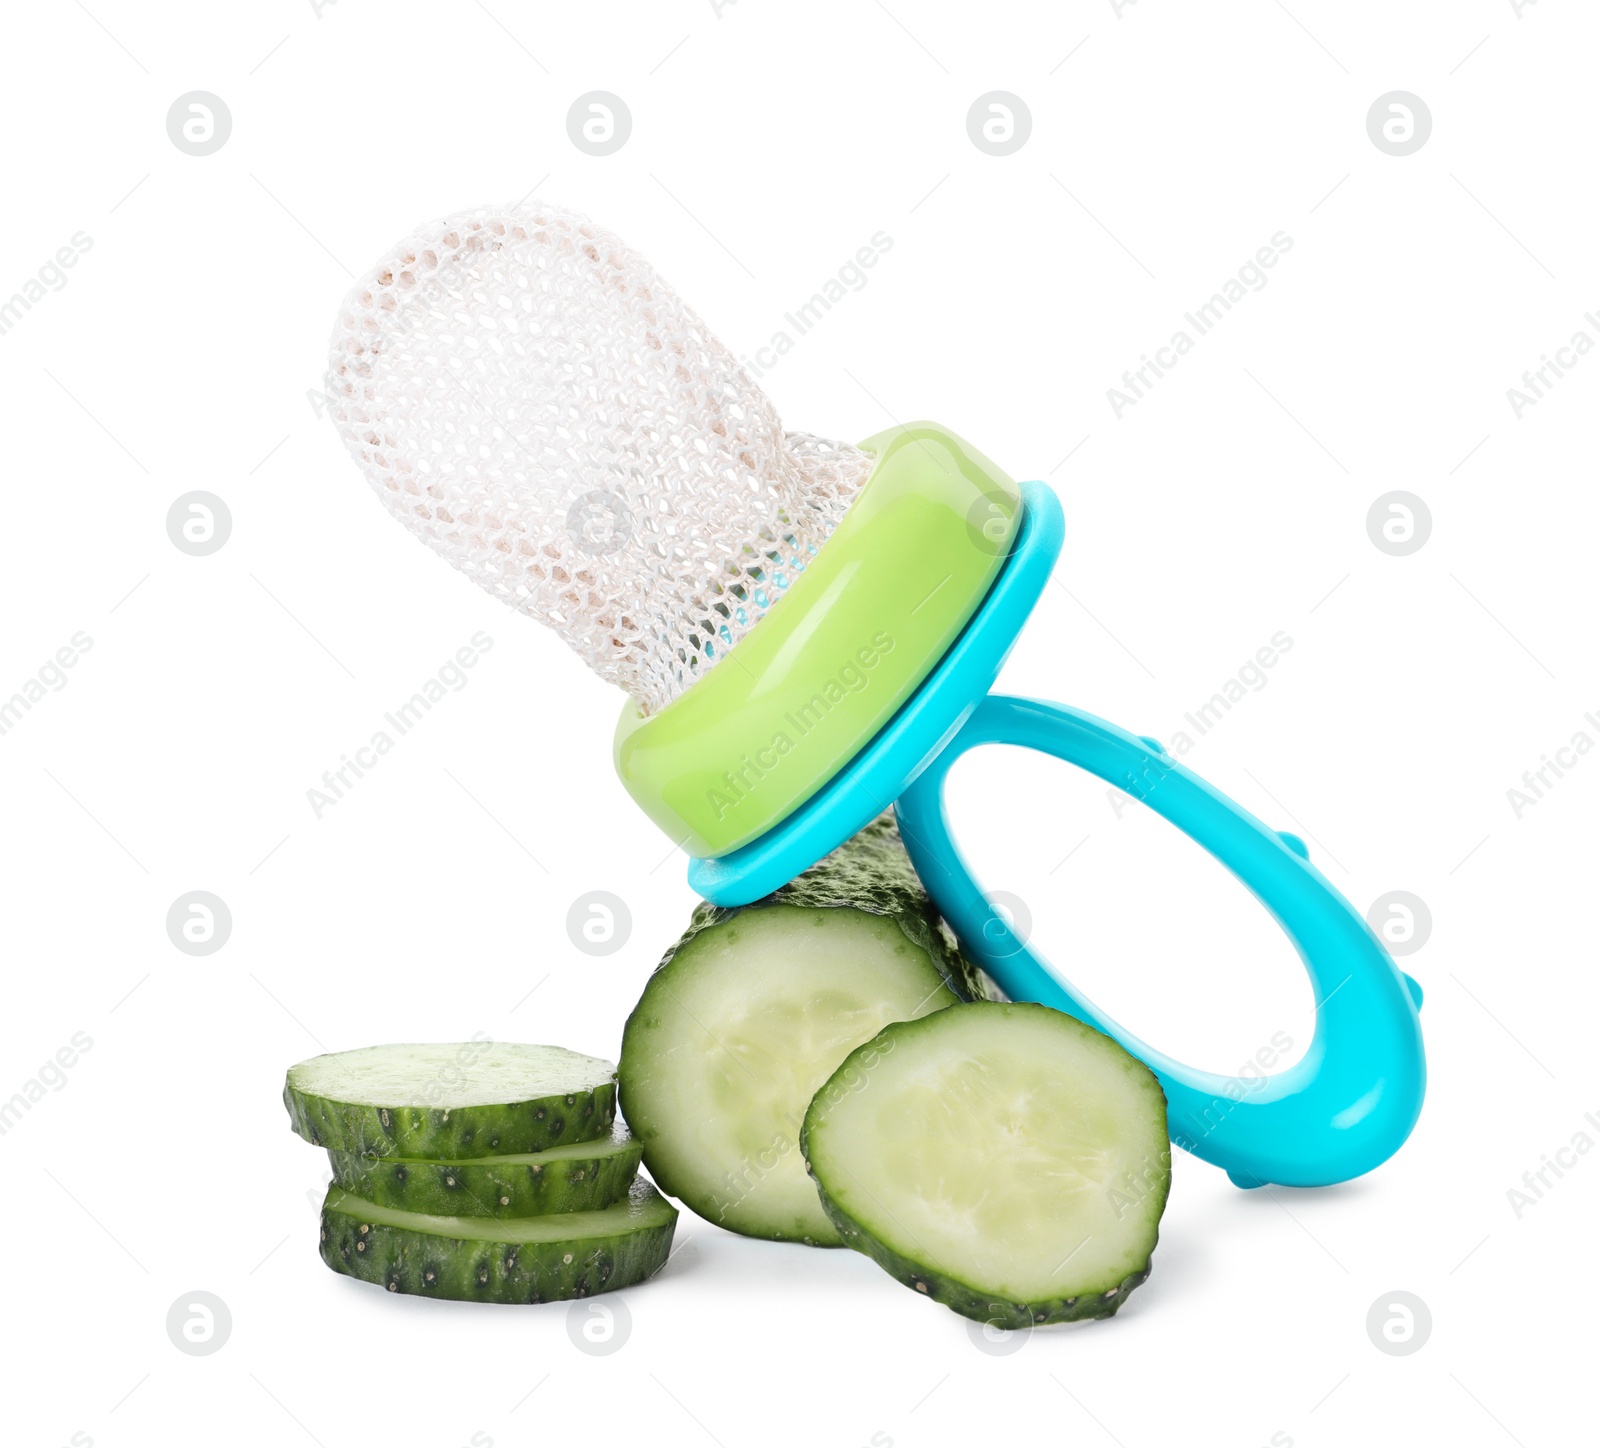 Photo of Empty nibbler and cut cucumber on white background. Baby feeder